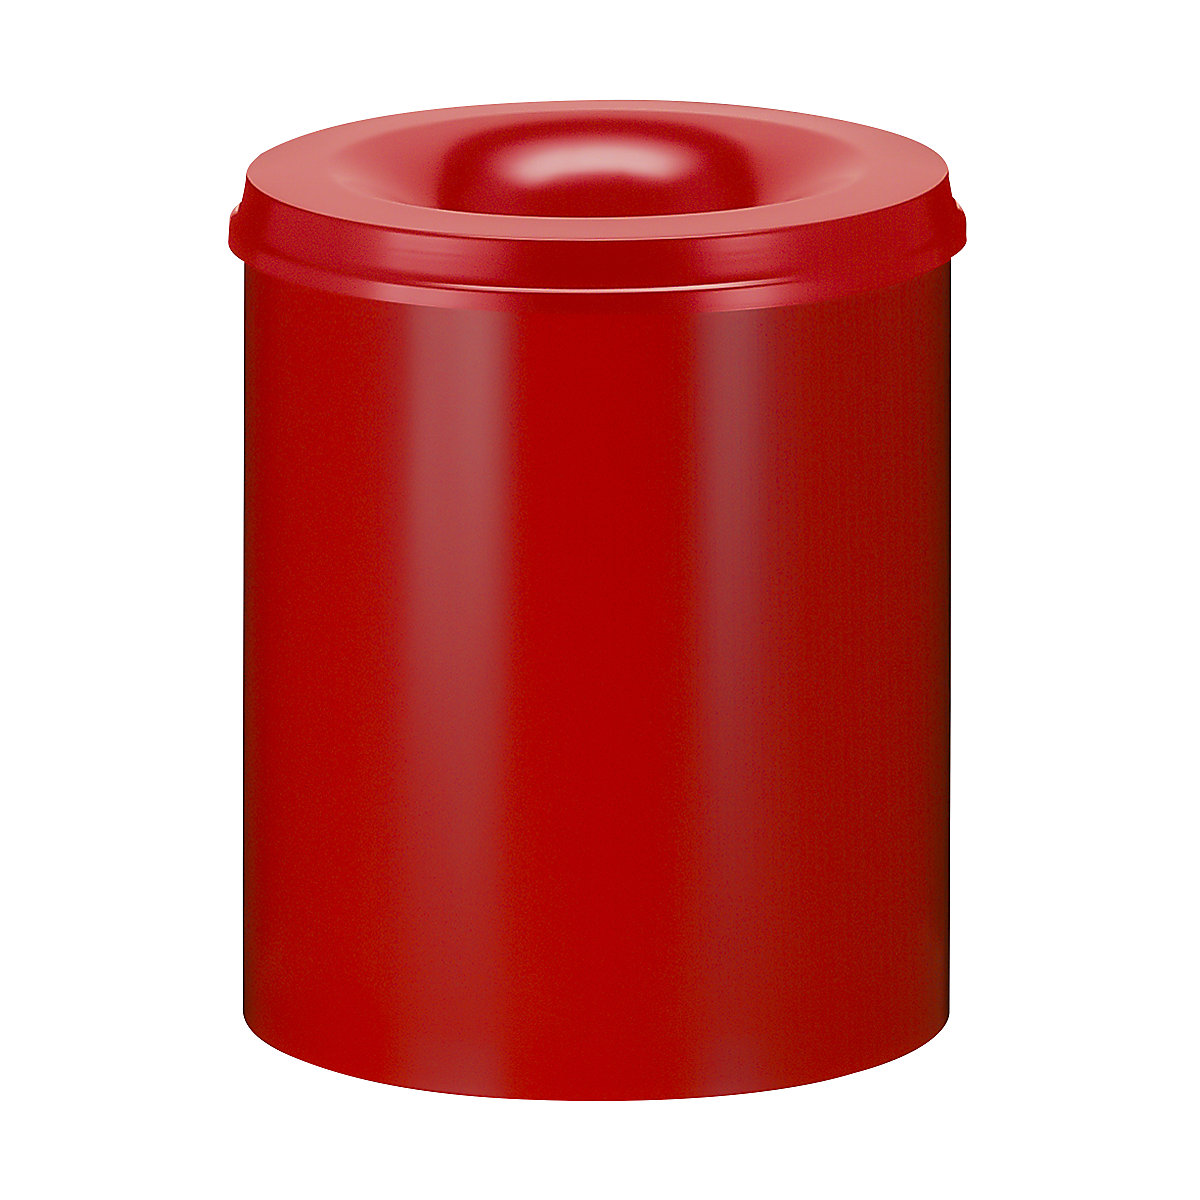 Safety waste paper bin, steel, self-extinguishing, capacity 80 l, HxØ 540 x 465 mm, body red / extinguishing lid red-9